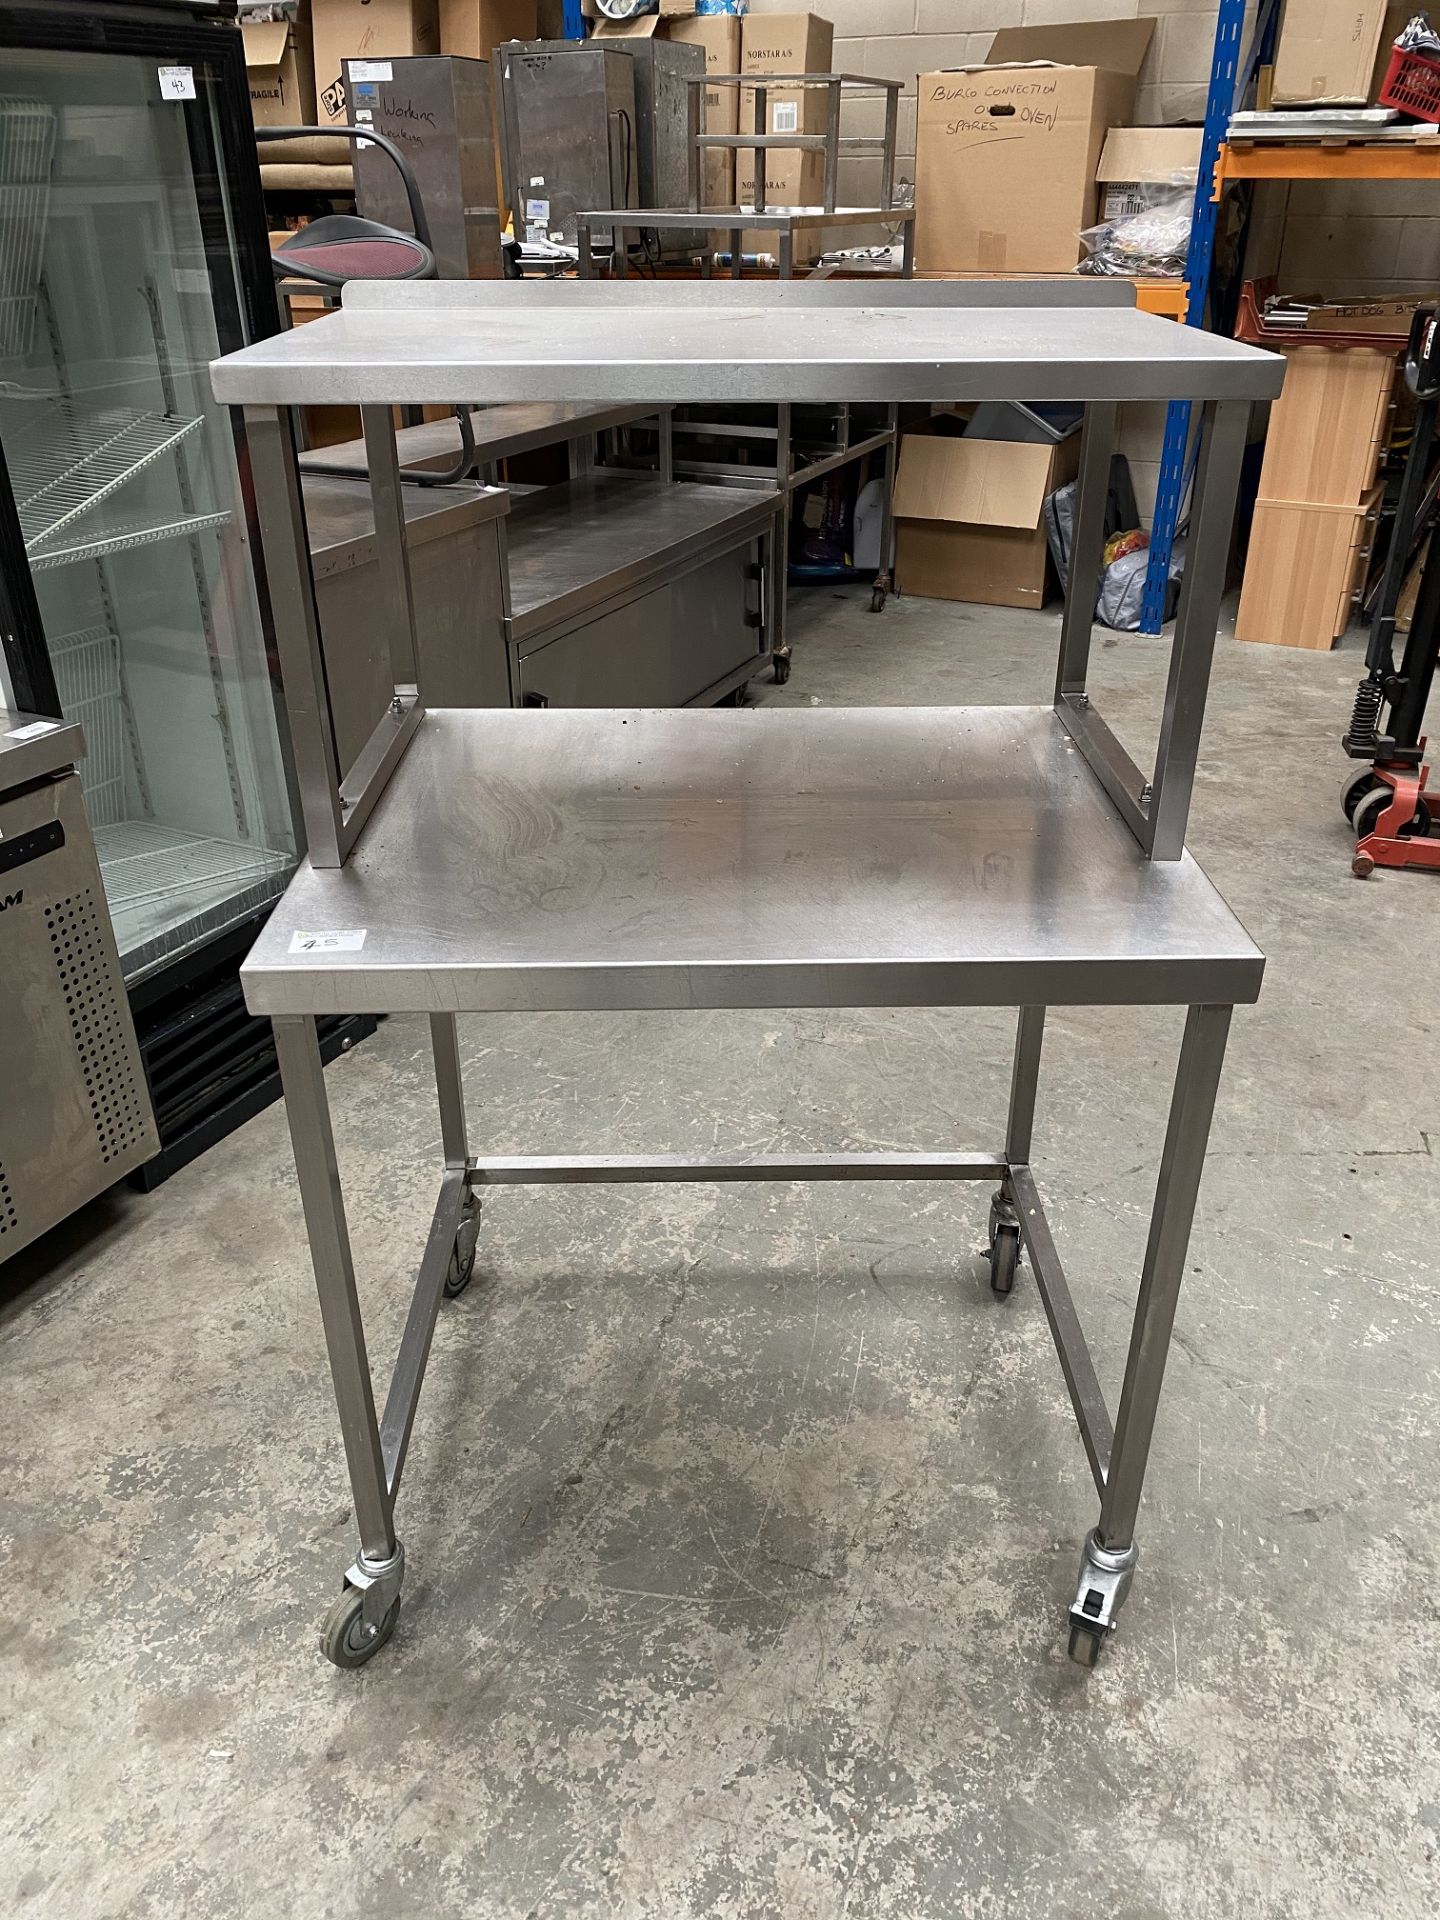 Stainless Steel Table On Wheels with Overshelf